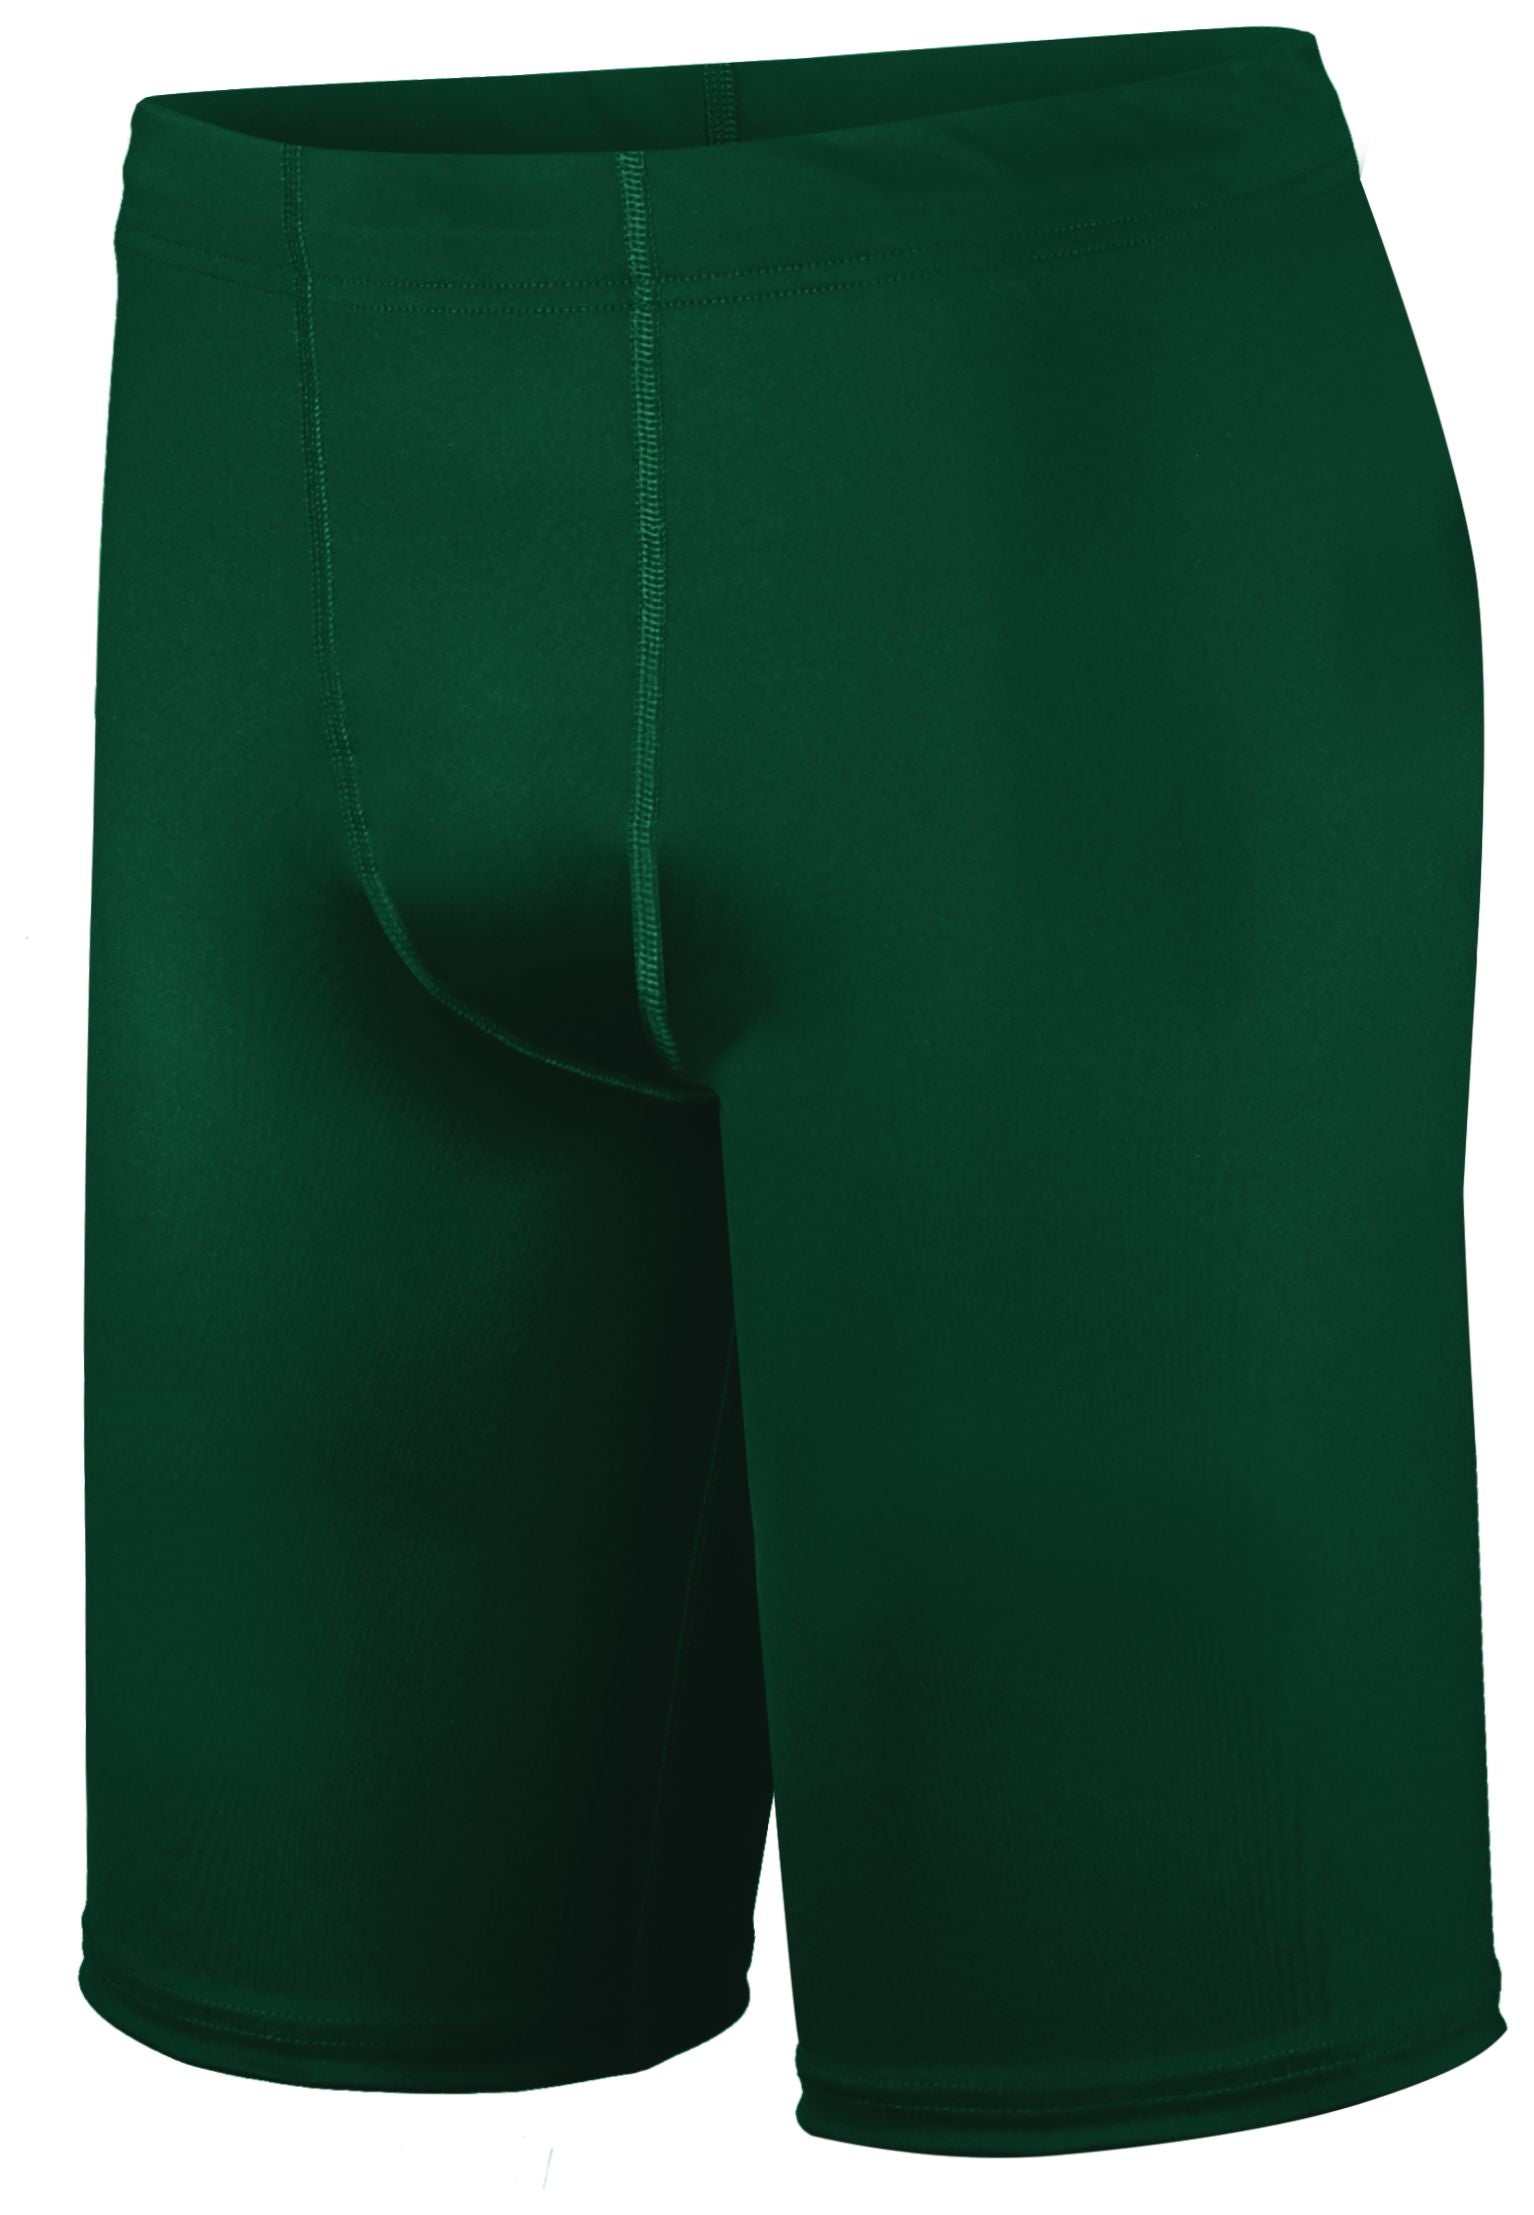 Holloway Pr Max Compression Shorts in Dark Green  -Part of the Adult, Adult-Shorts, Track-Field, Holloway product lines at KanaleyCreations.com